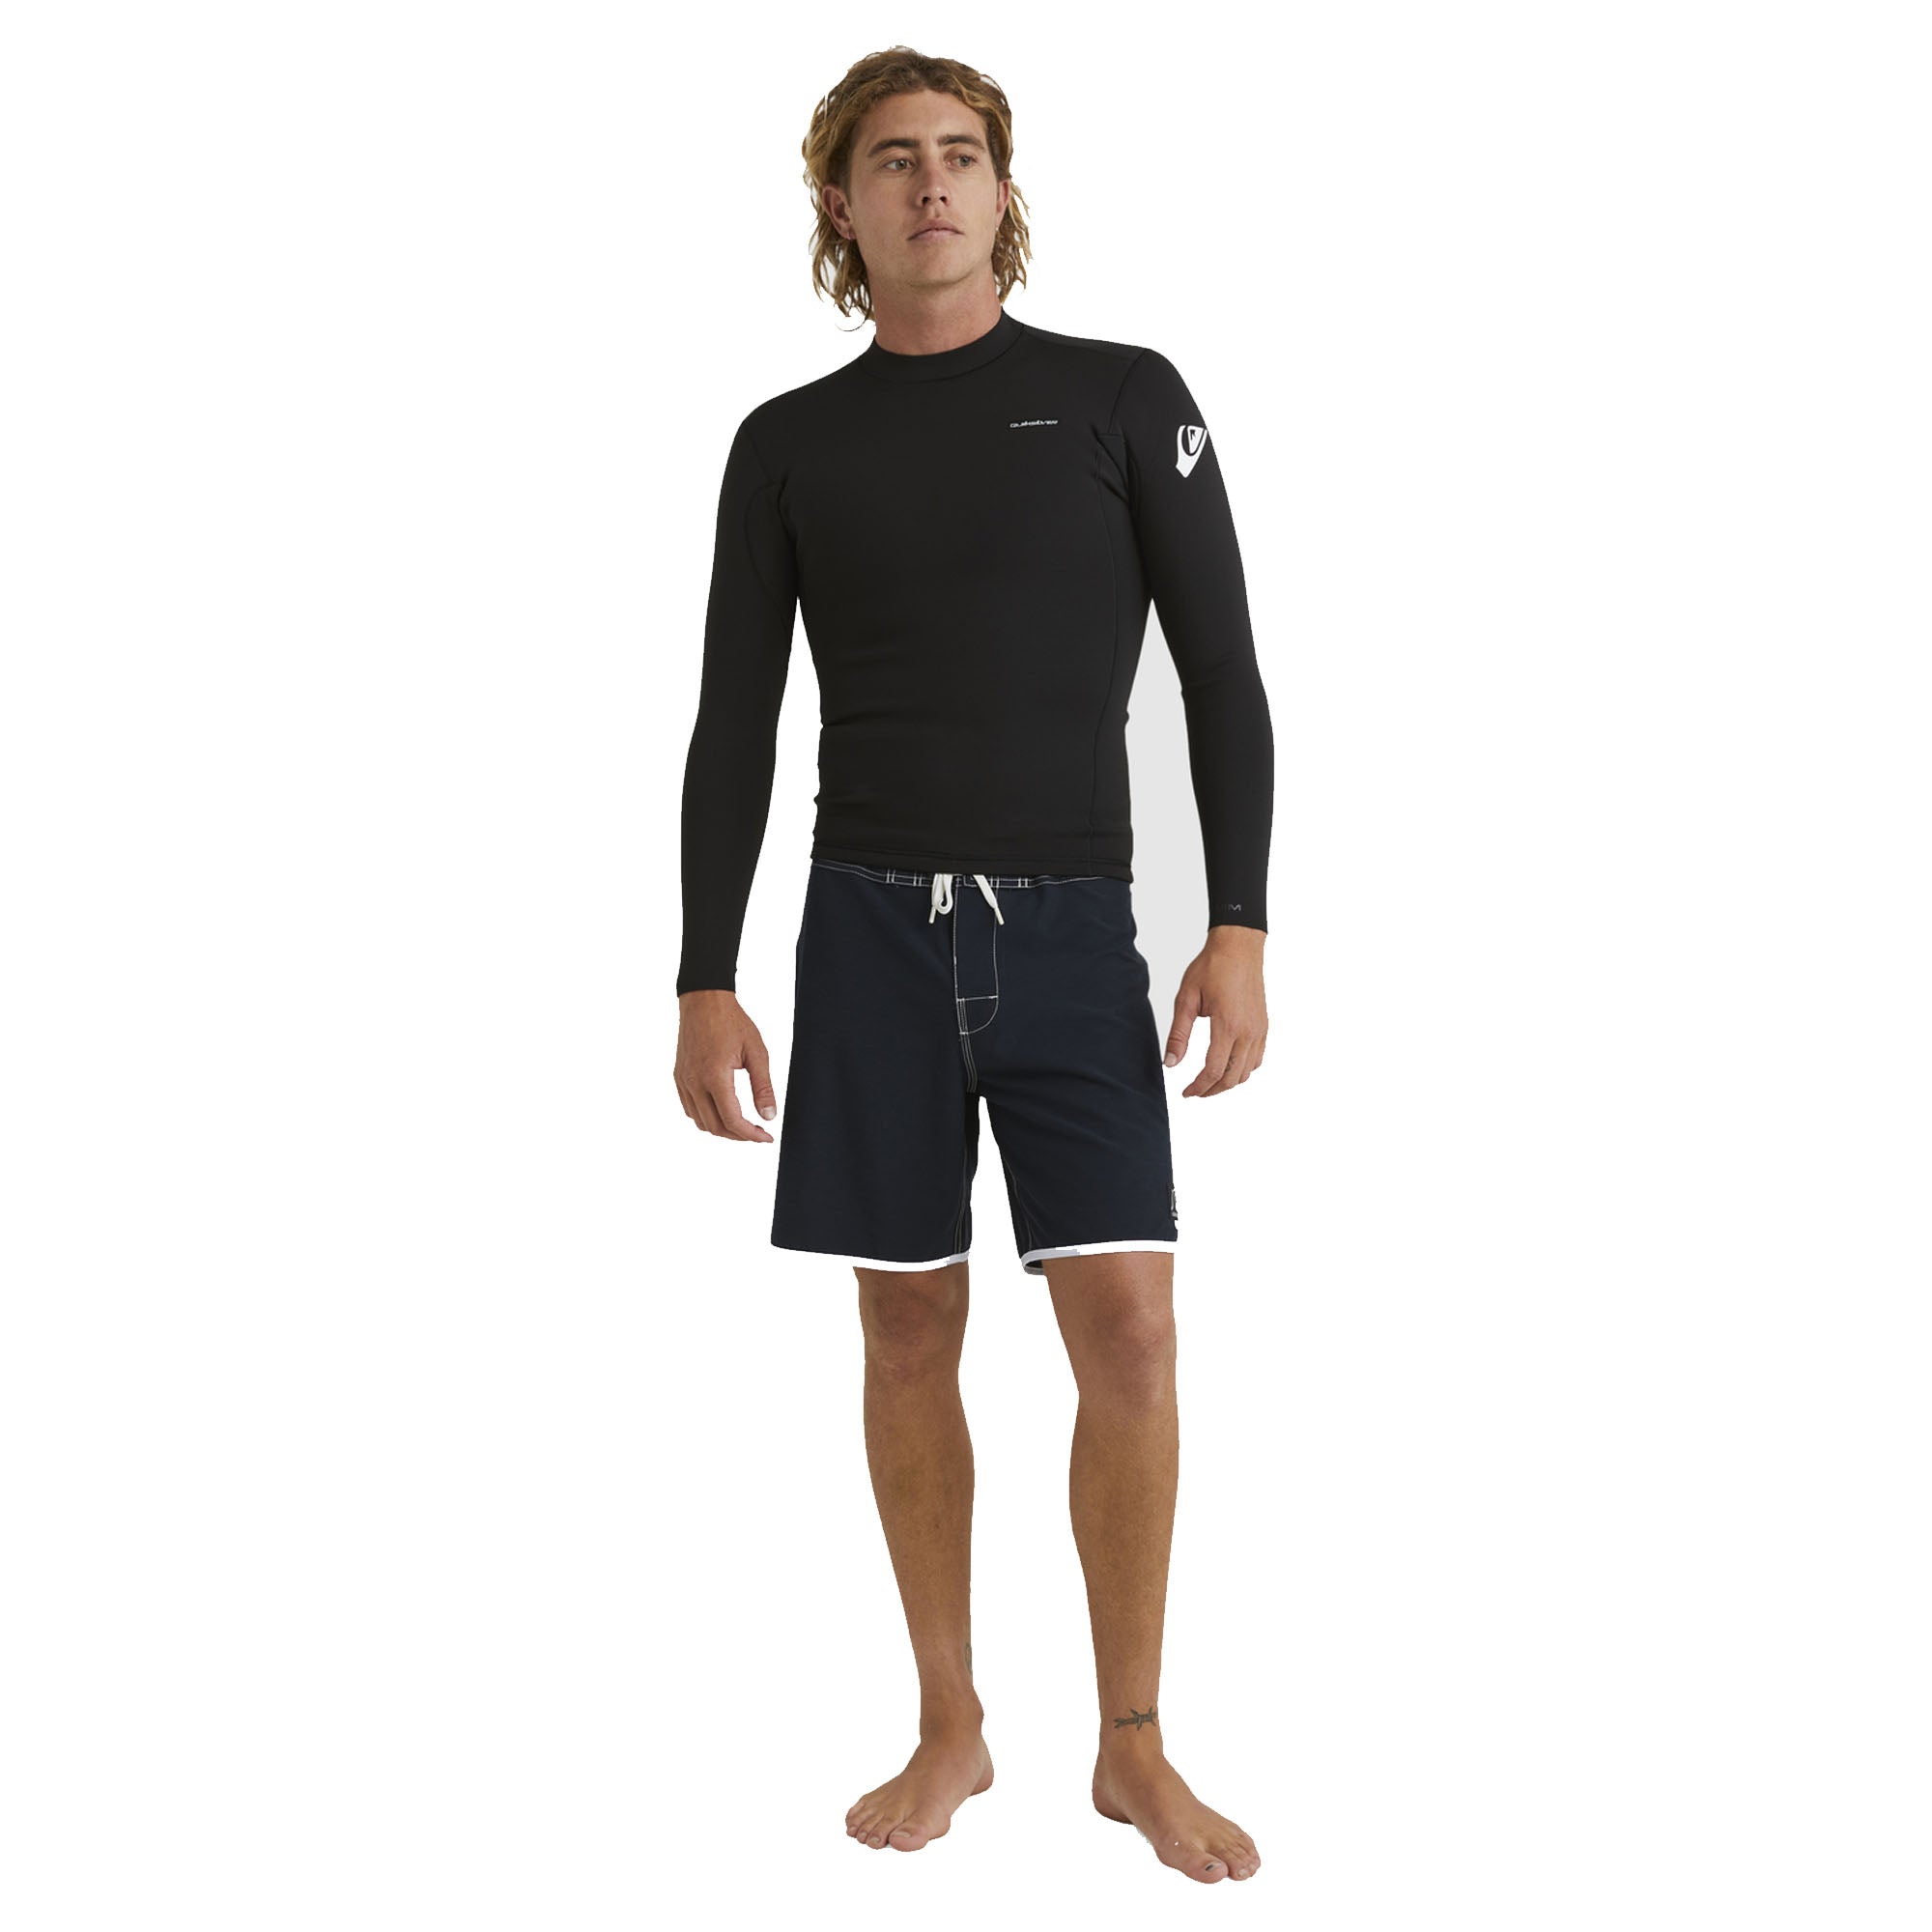 Quiksilver Everyday Sessions 1.5mm Men's Wetsuit